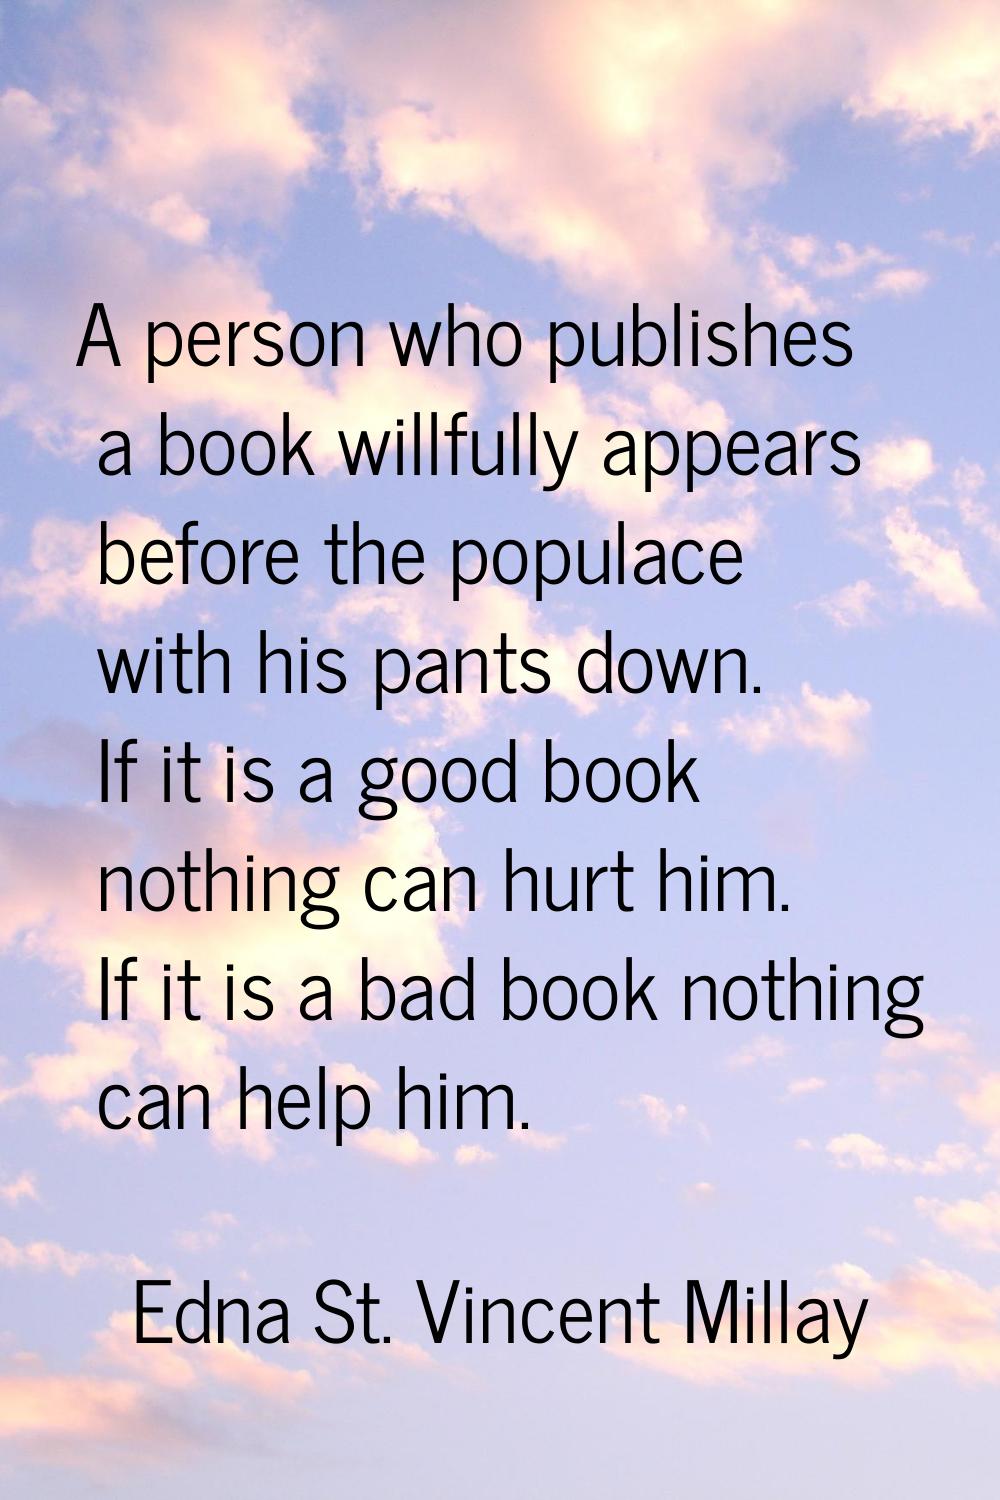 A person who publishes a book willfully appears before the populace with his pants down. If it is a